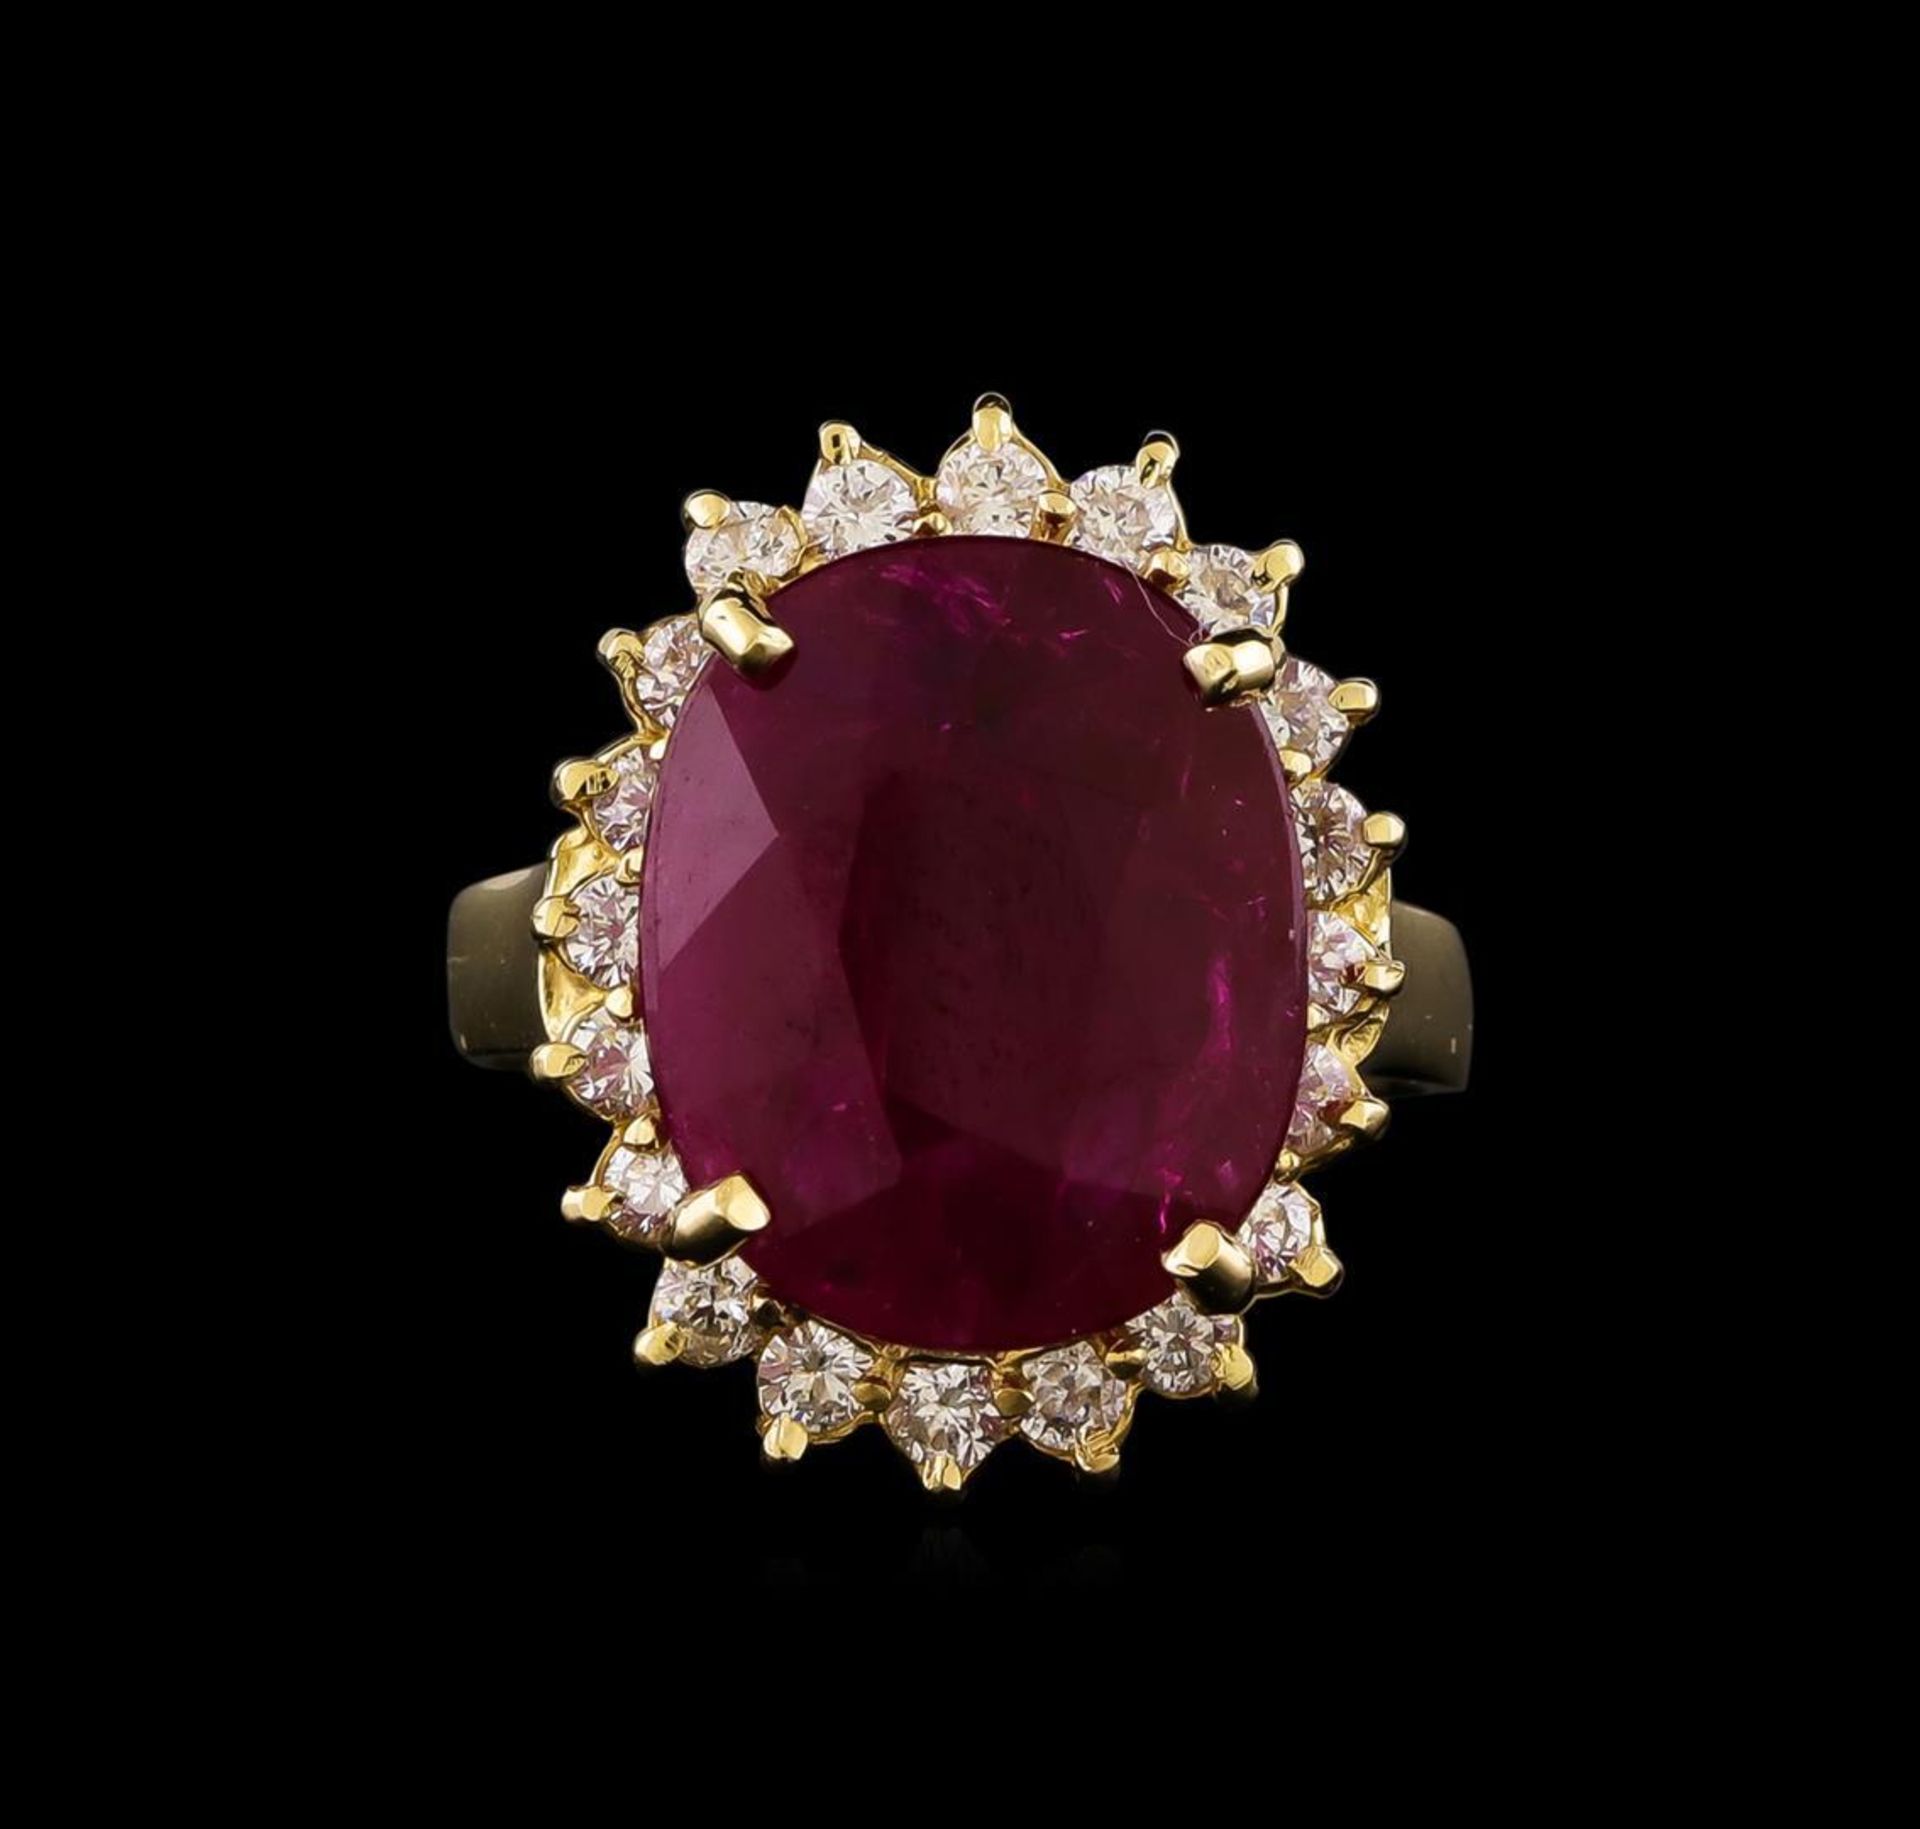 GIA Cert 6.96 ctw Ruby and Diamond Ring - 14KT Yellow Gold - Image 2 of 6